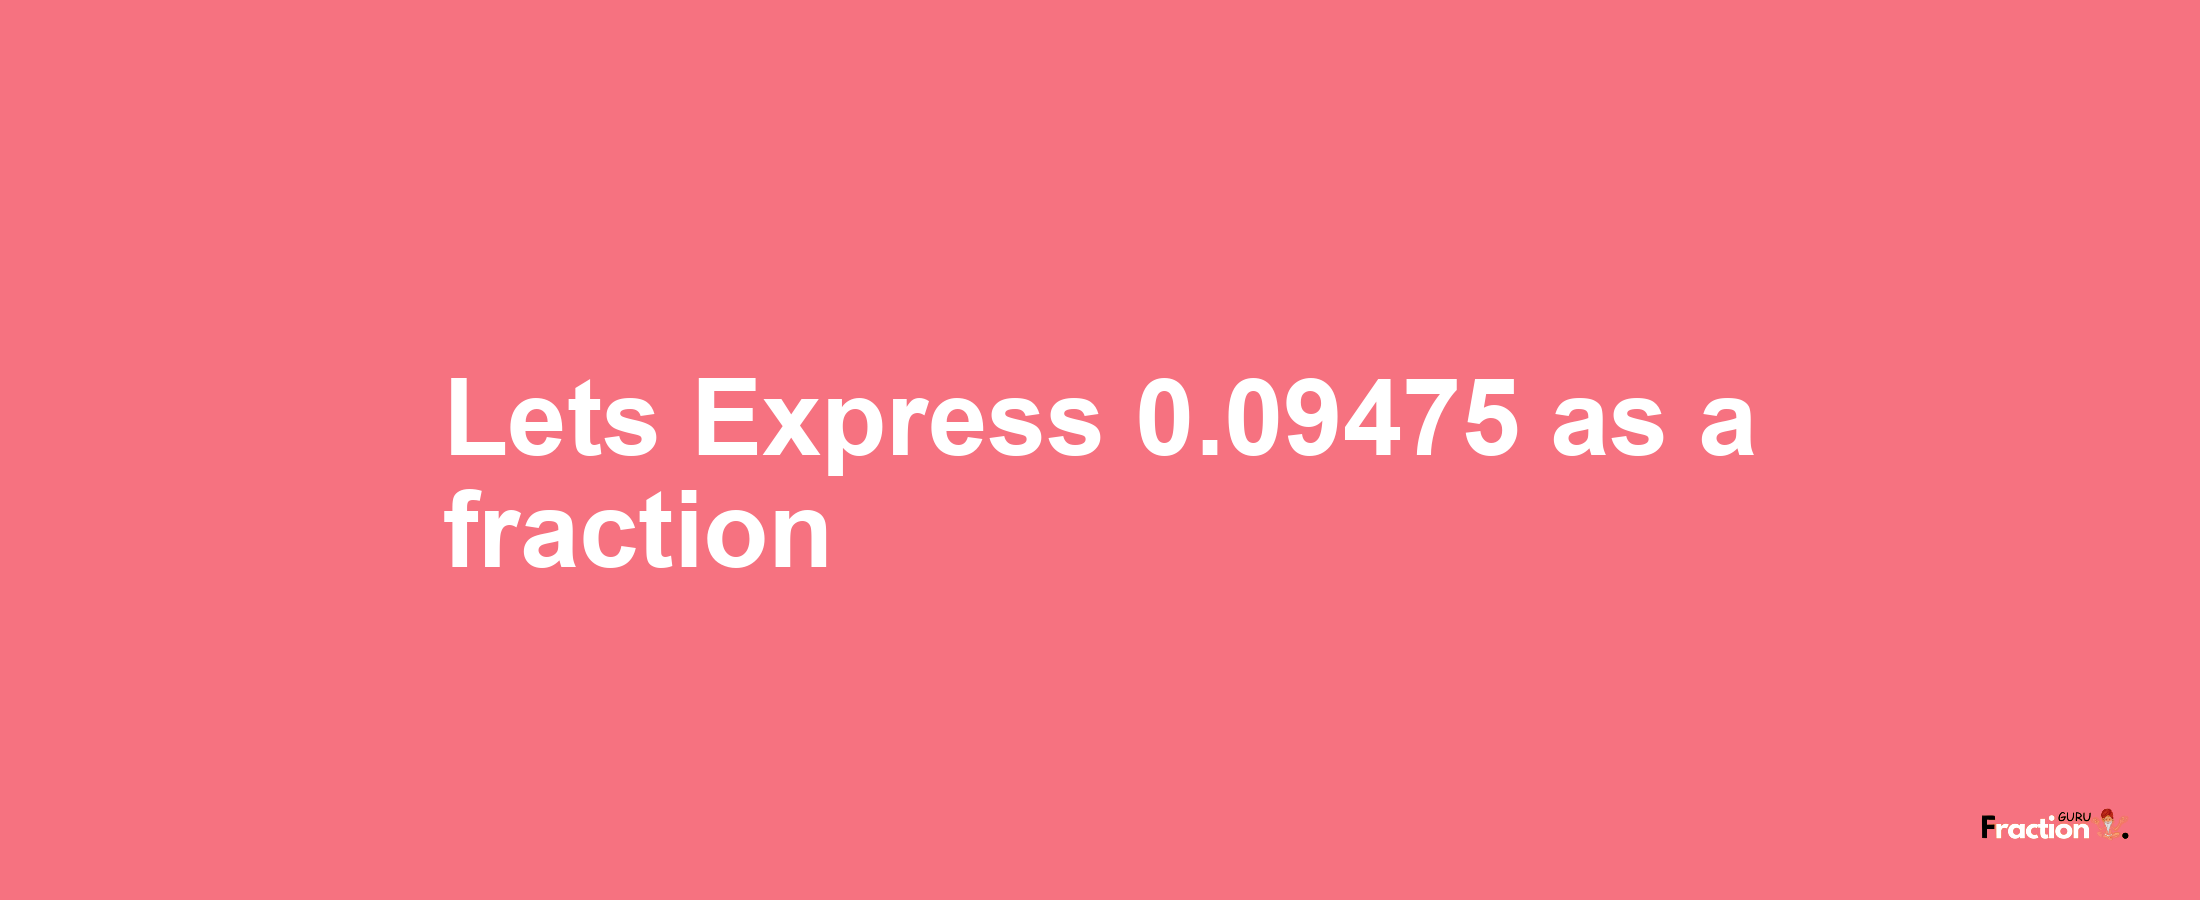 Lets Express 0.09475 as afraction